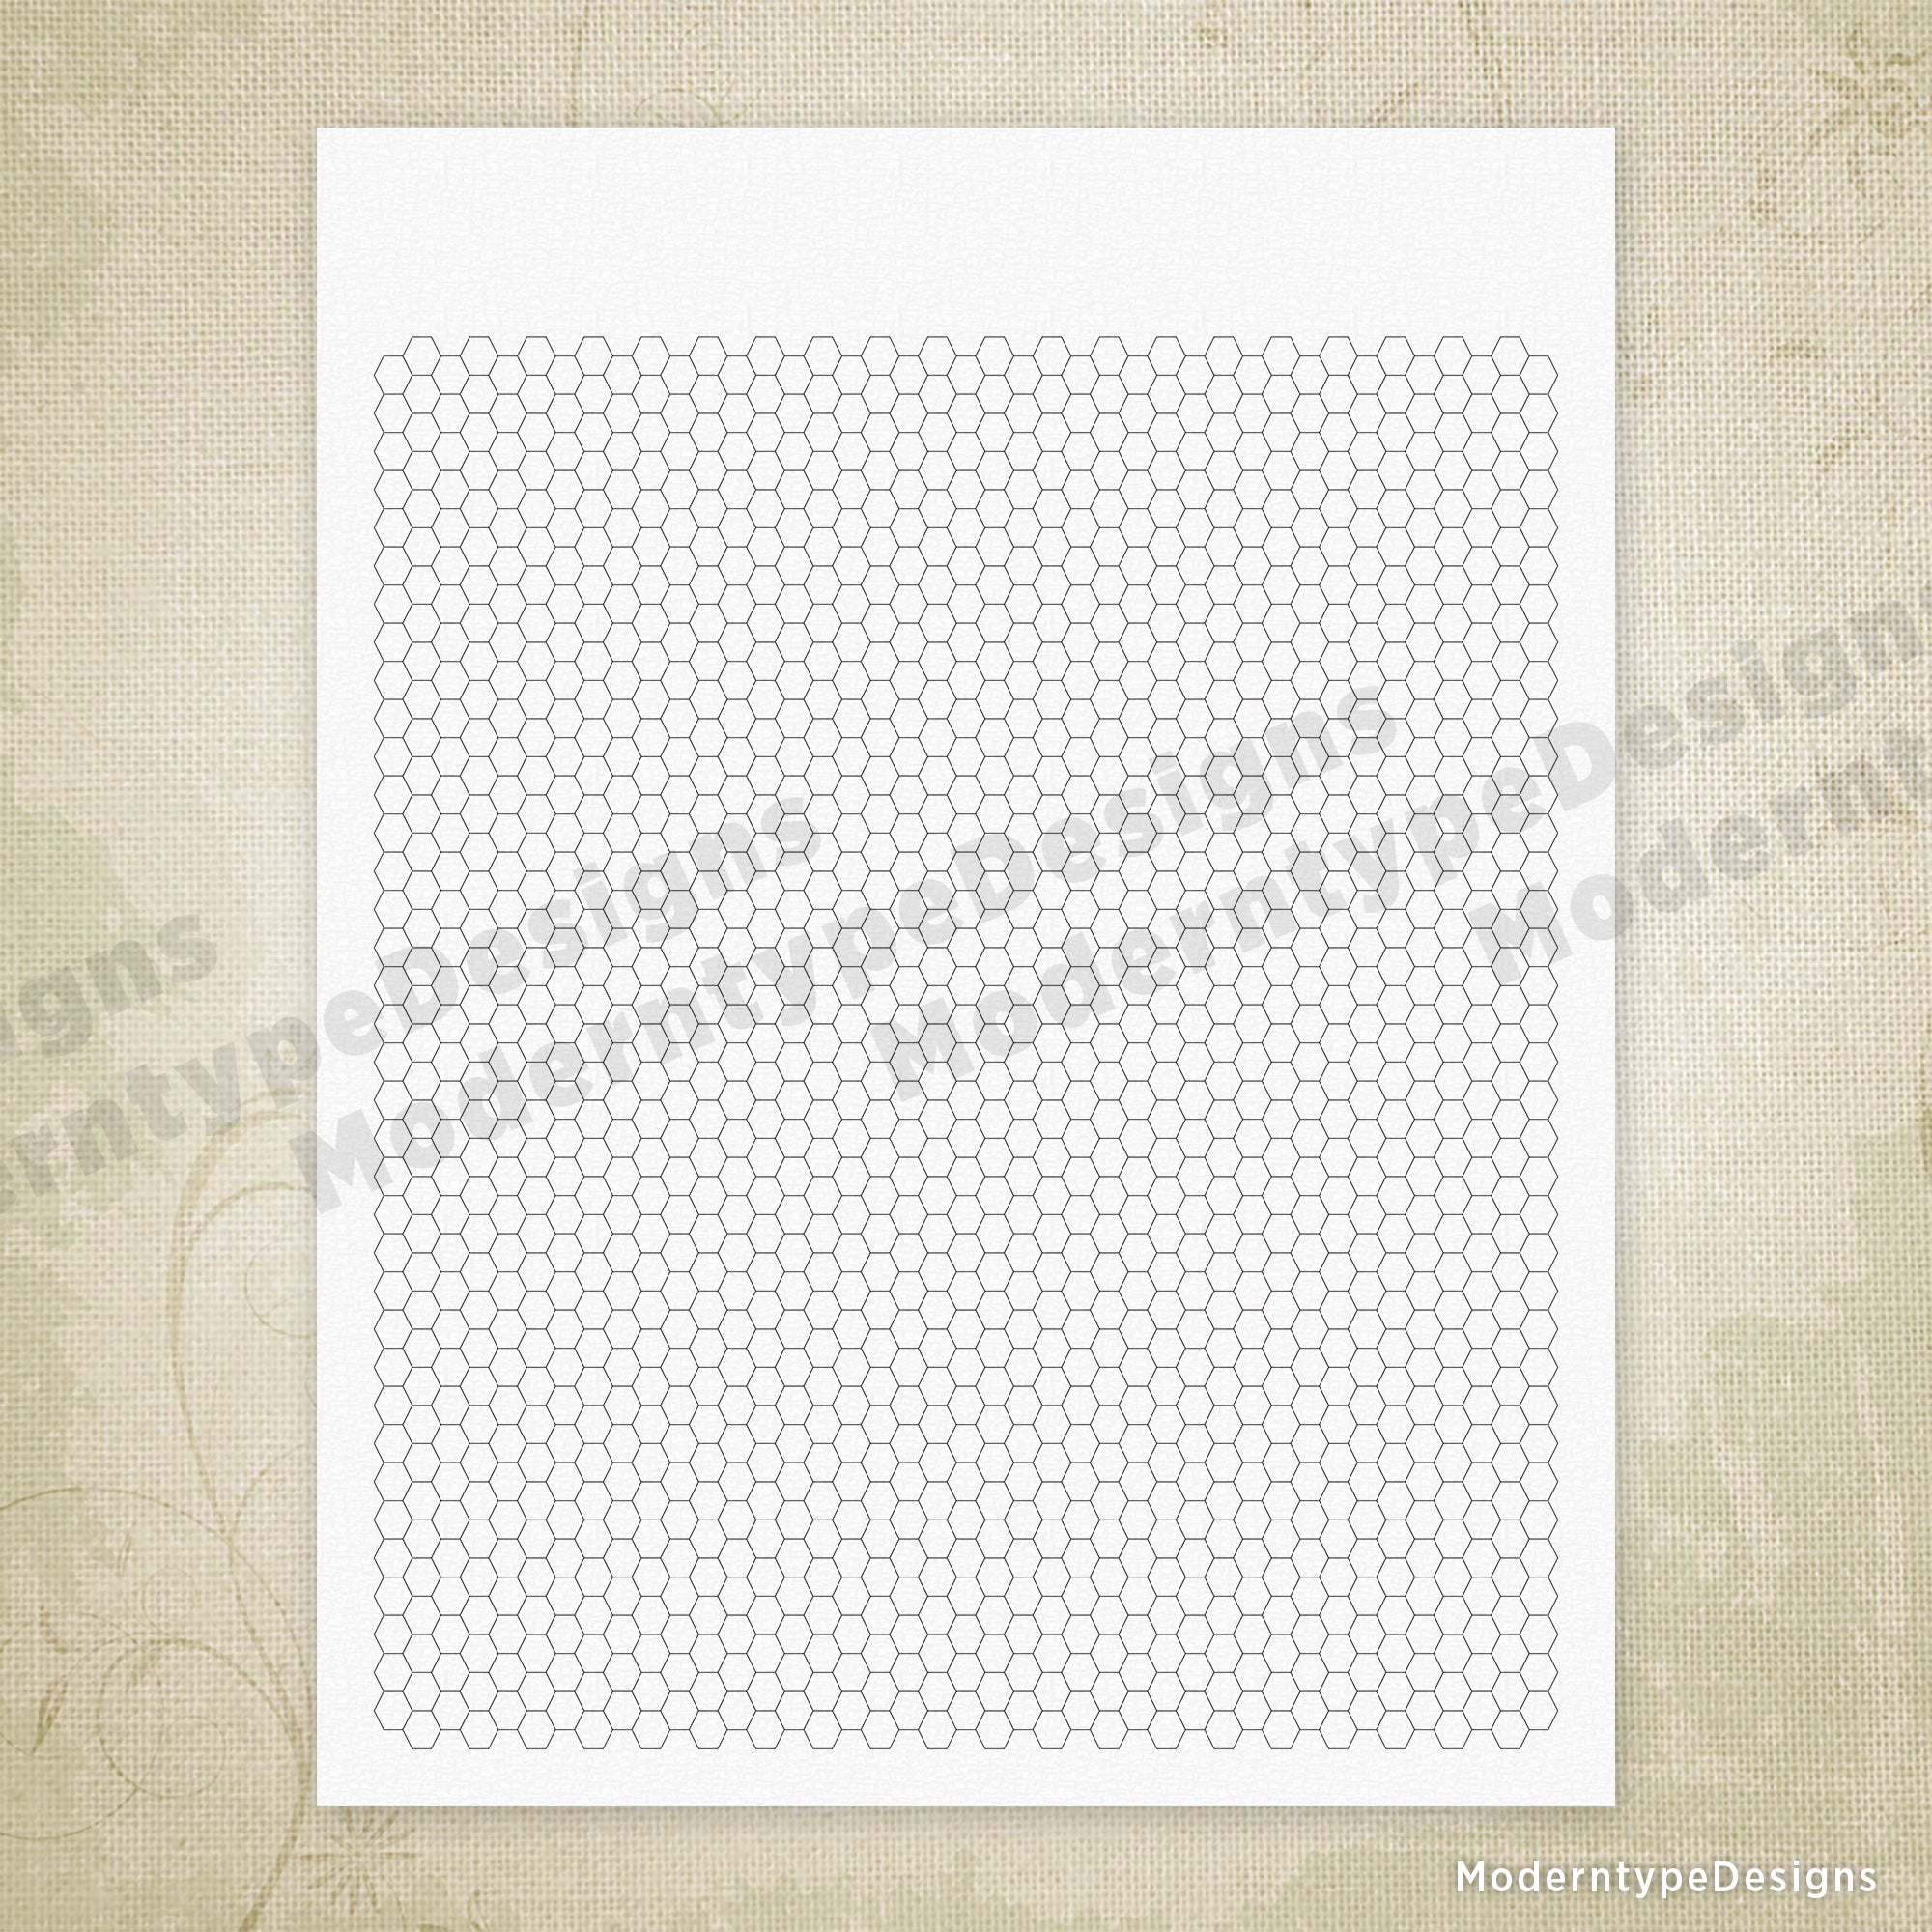 Printable 1/4 Inch Dot Grid Paper for A4 Paper